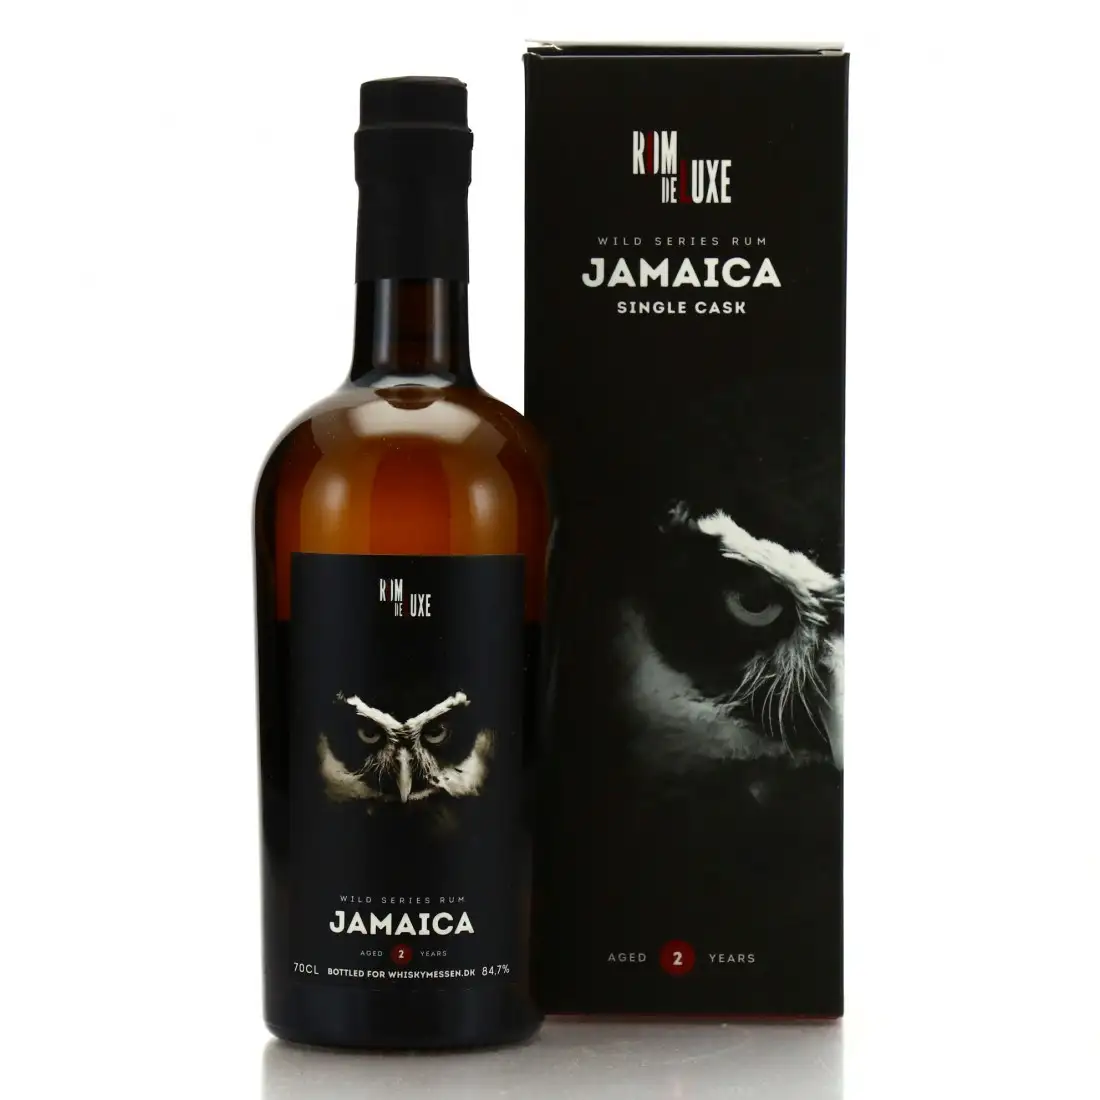 Image of the front of the bottle of the rum Wild Series Rum Jamaica No. 39 NYE/WK